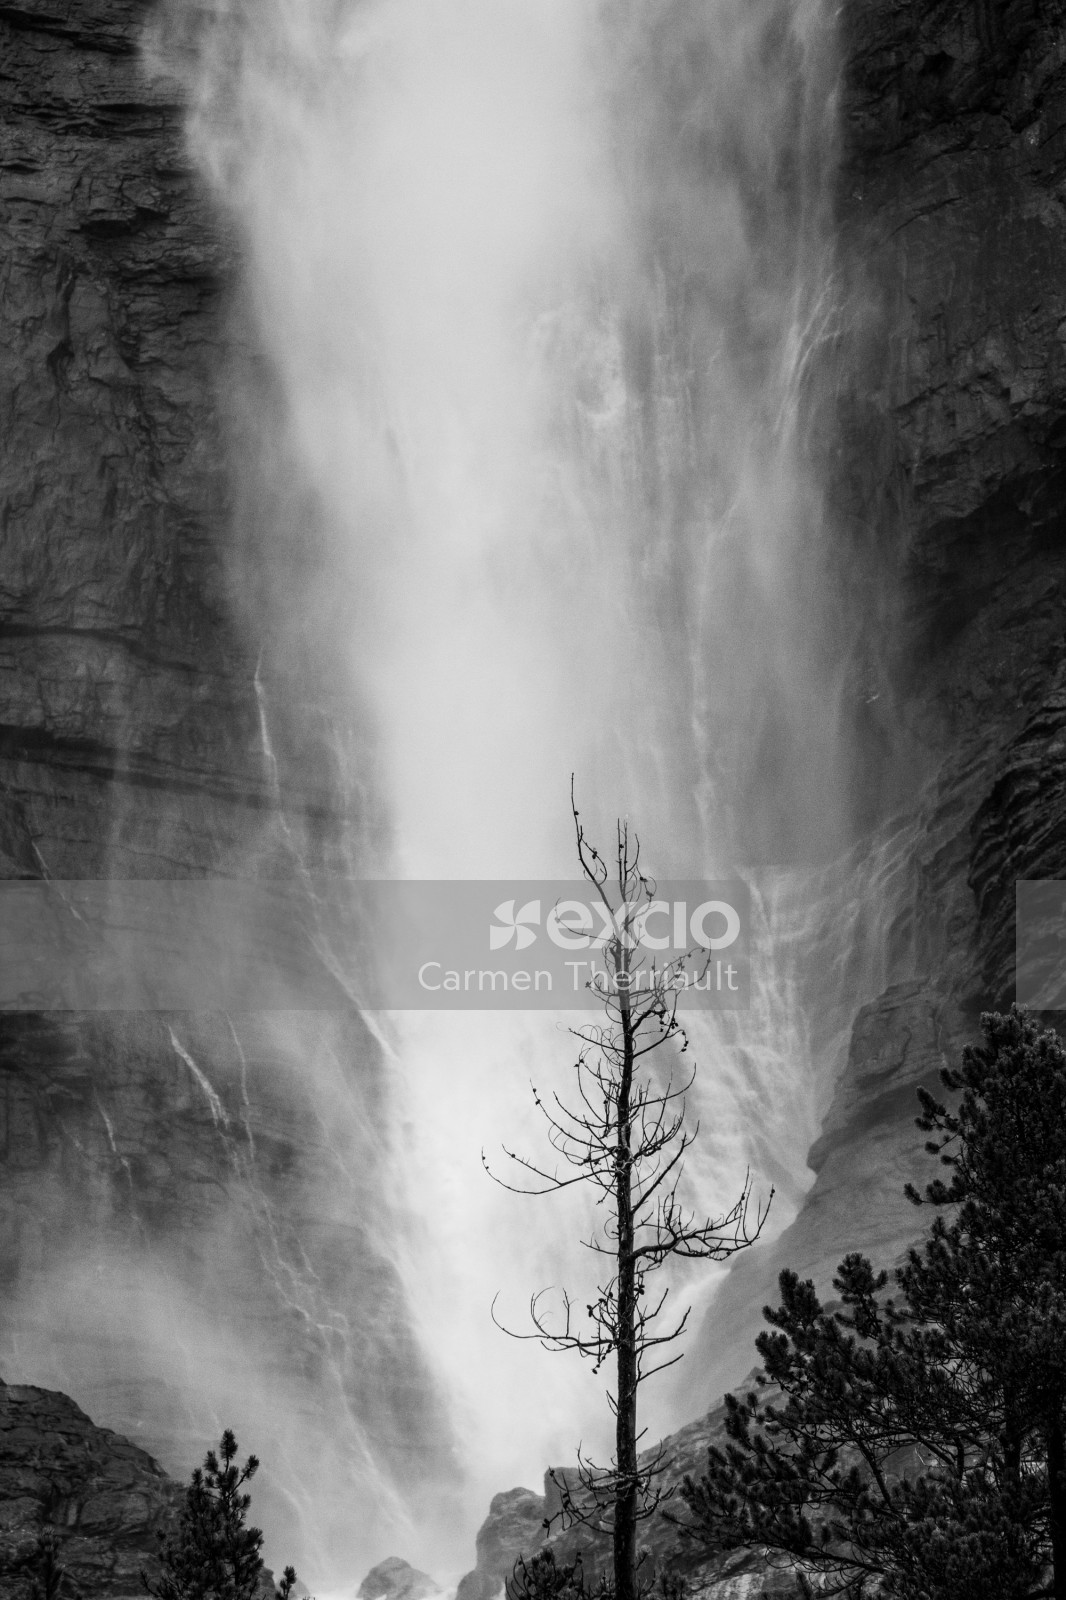 Waterfall in Black and white